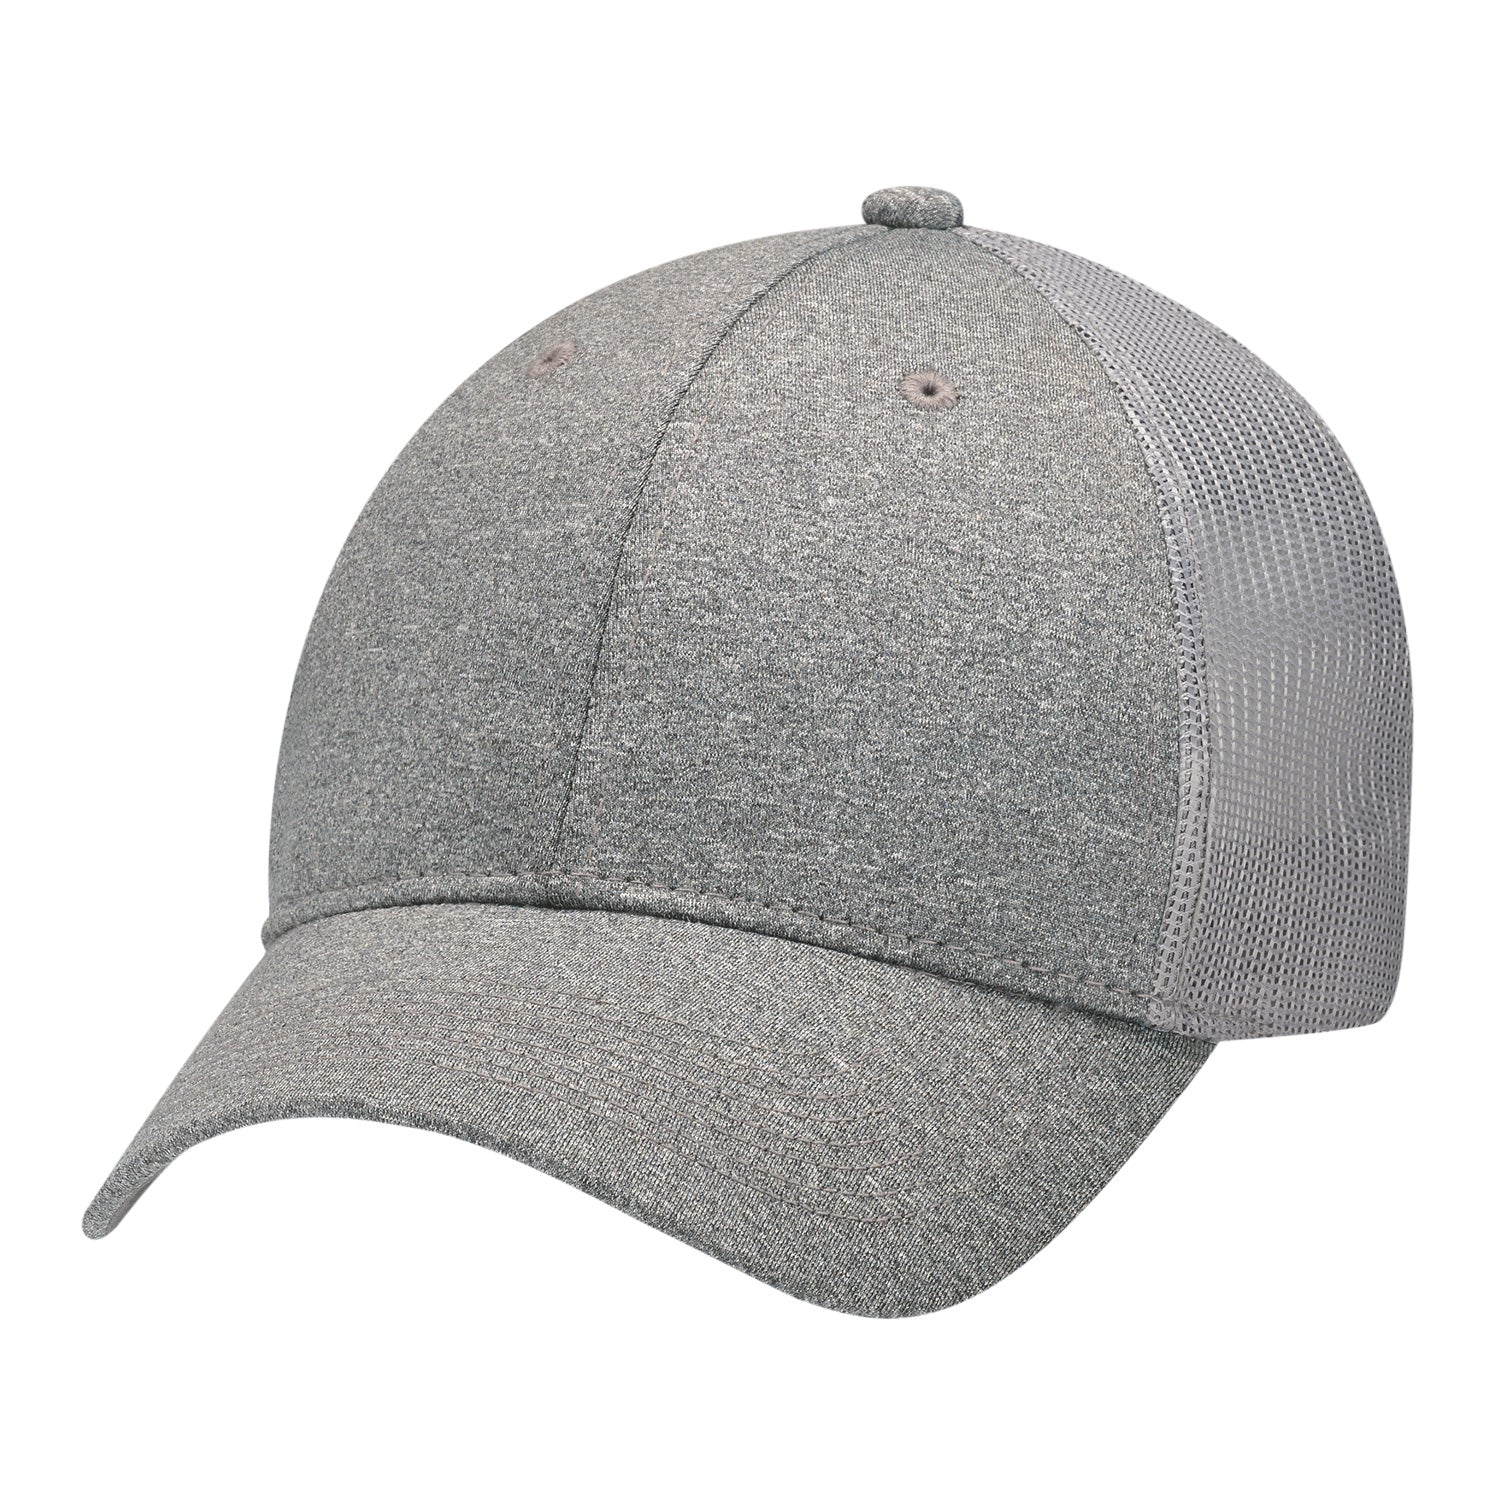 Polyester Heather / Soft Nylon Mesh 6 Panel Constructed Full-Fit Mesh Back Cap